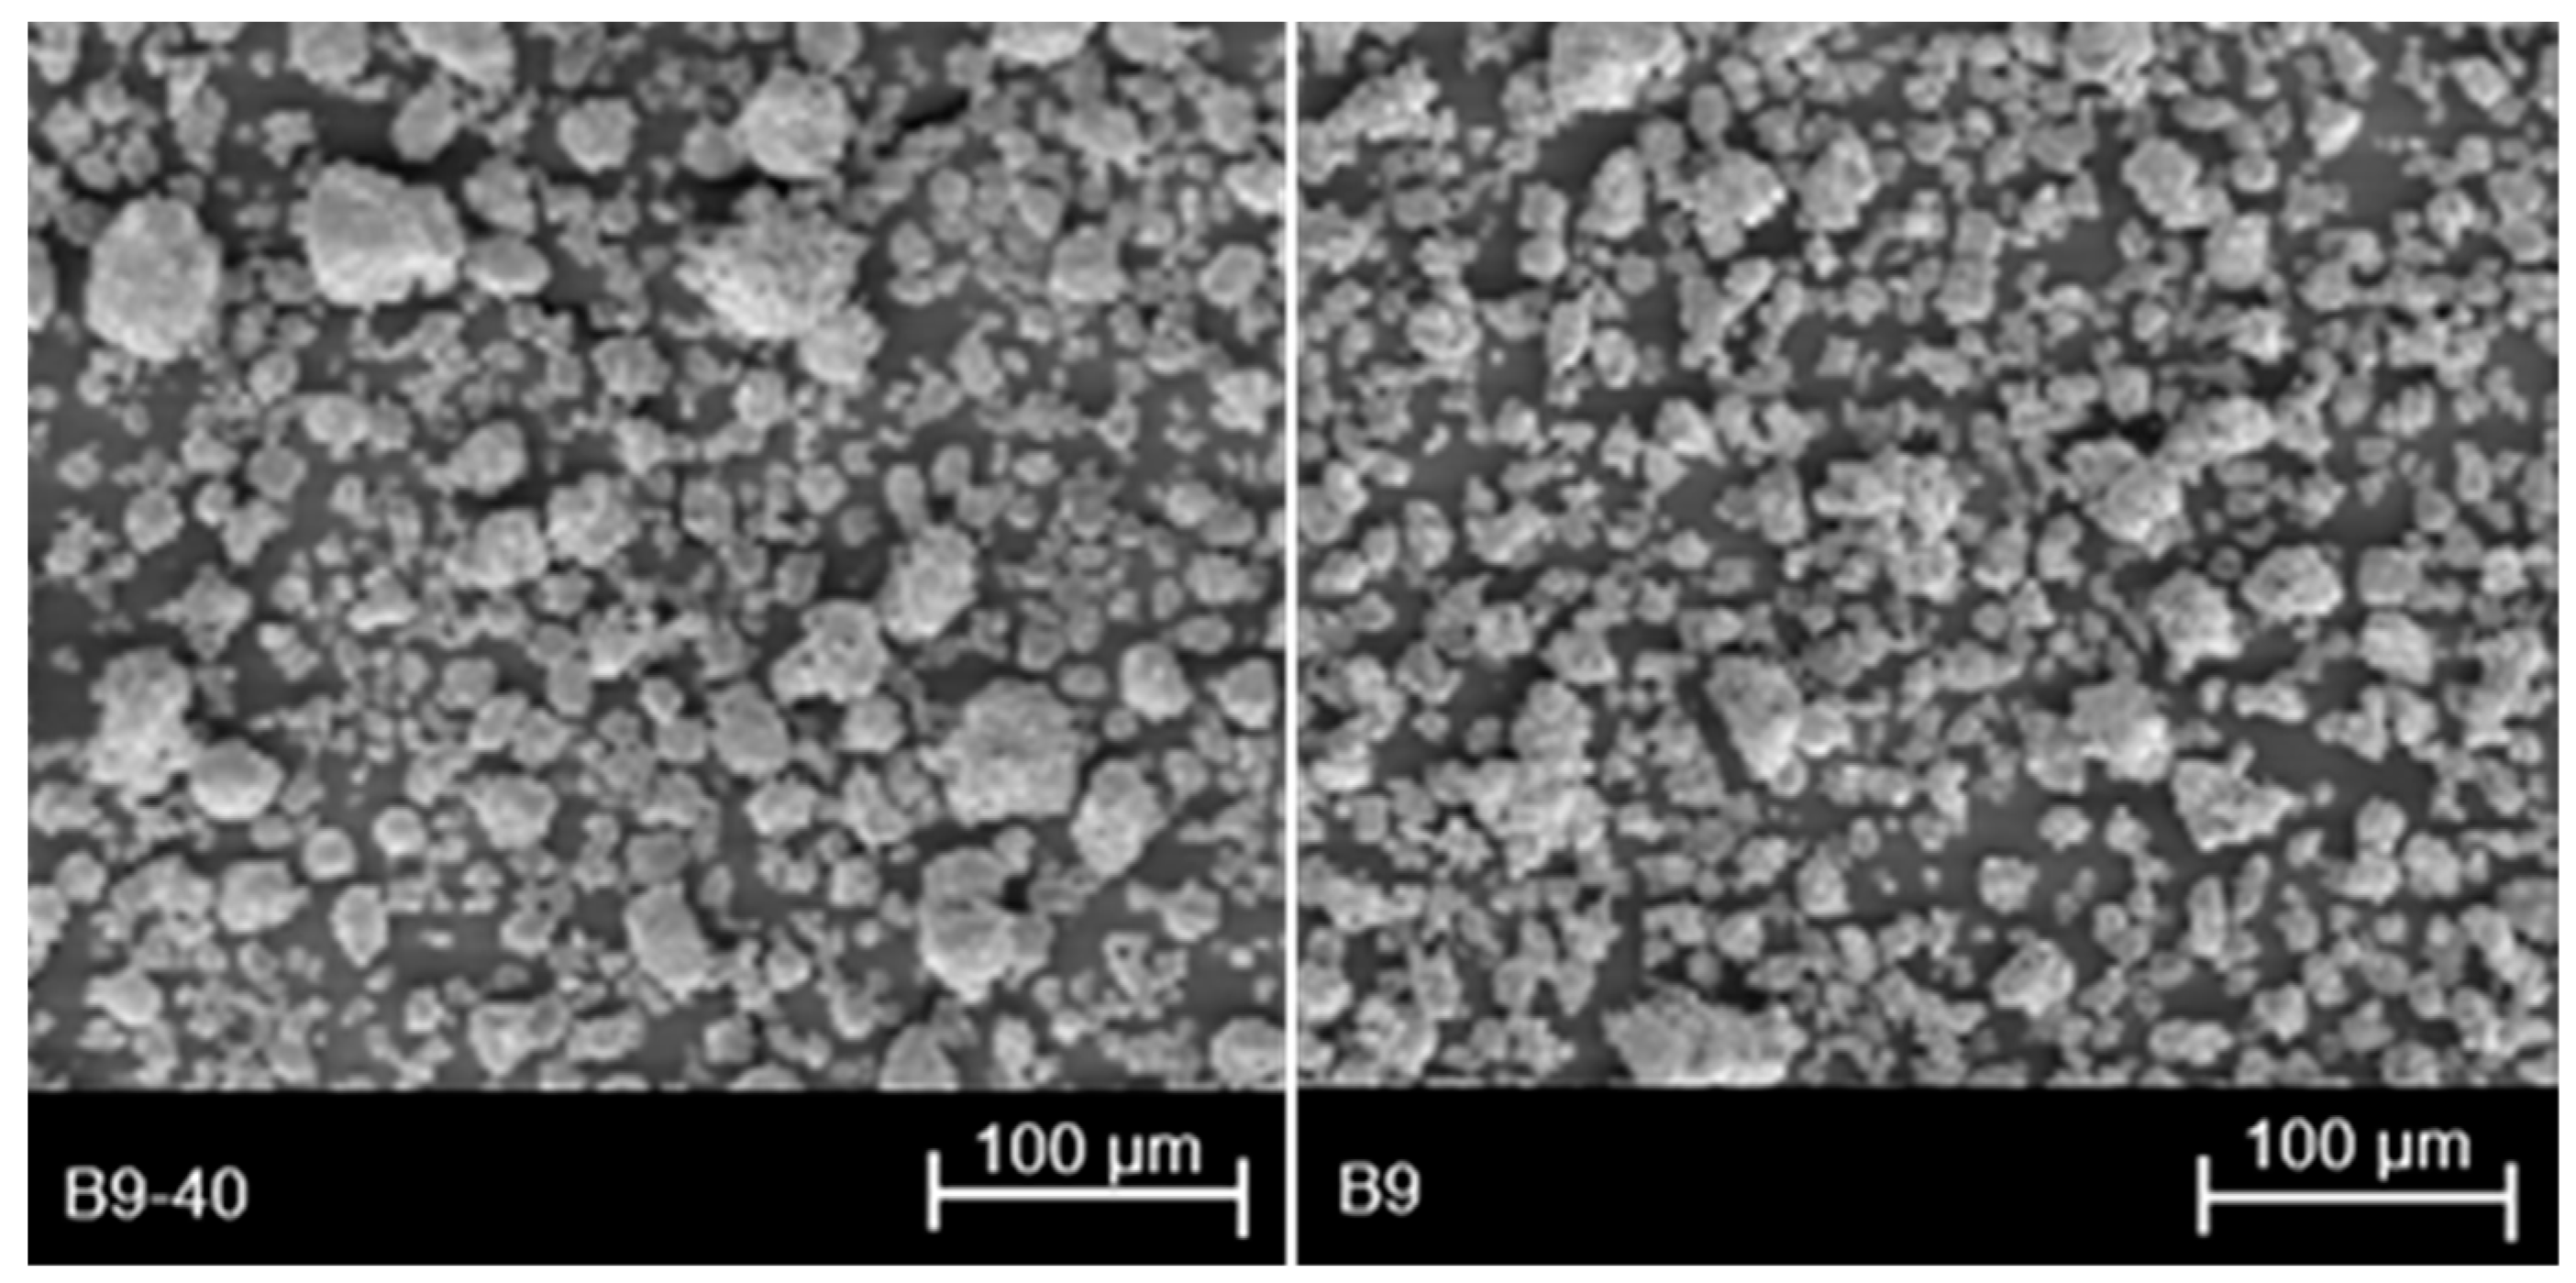 Elemental components of FINEMET-like-soft magnetic alloys including